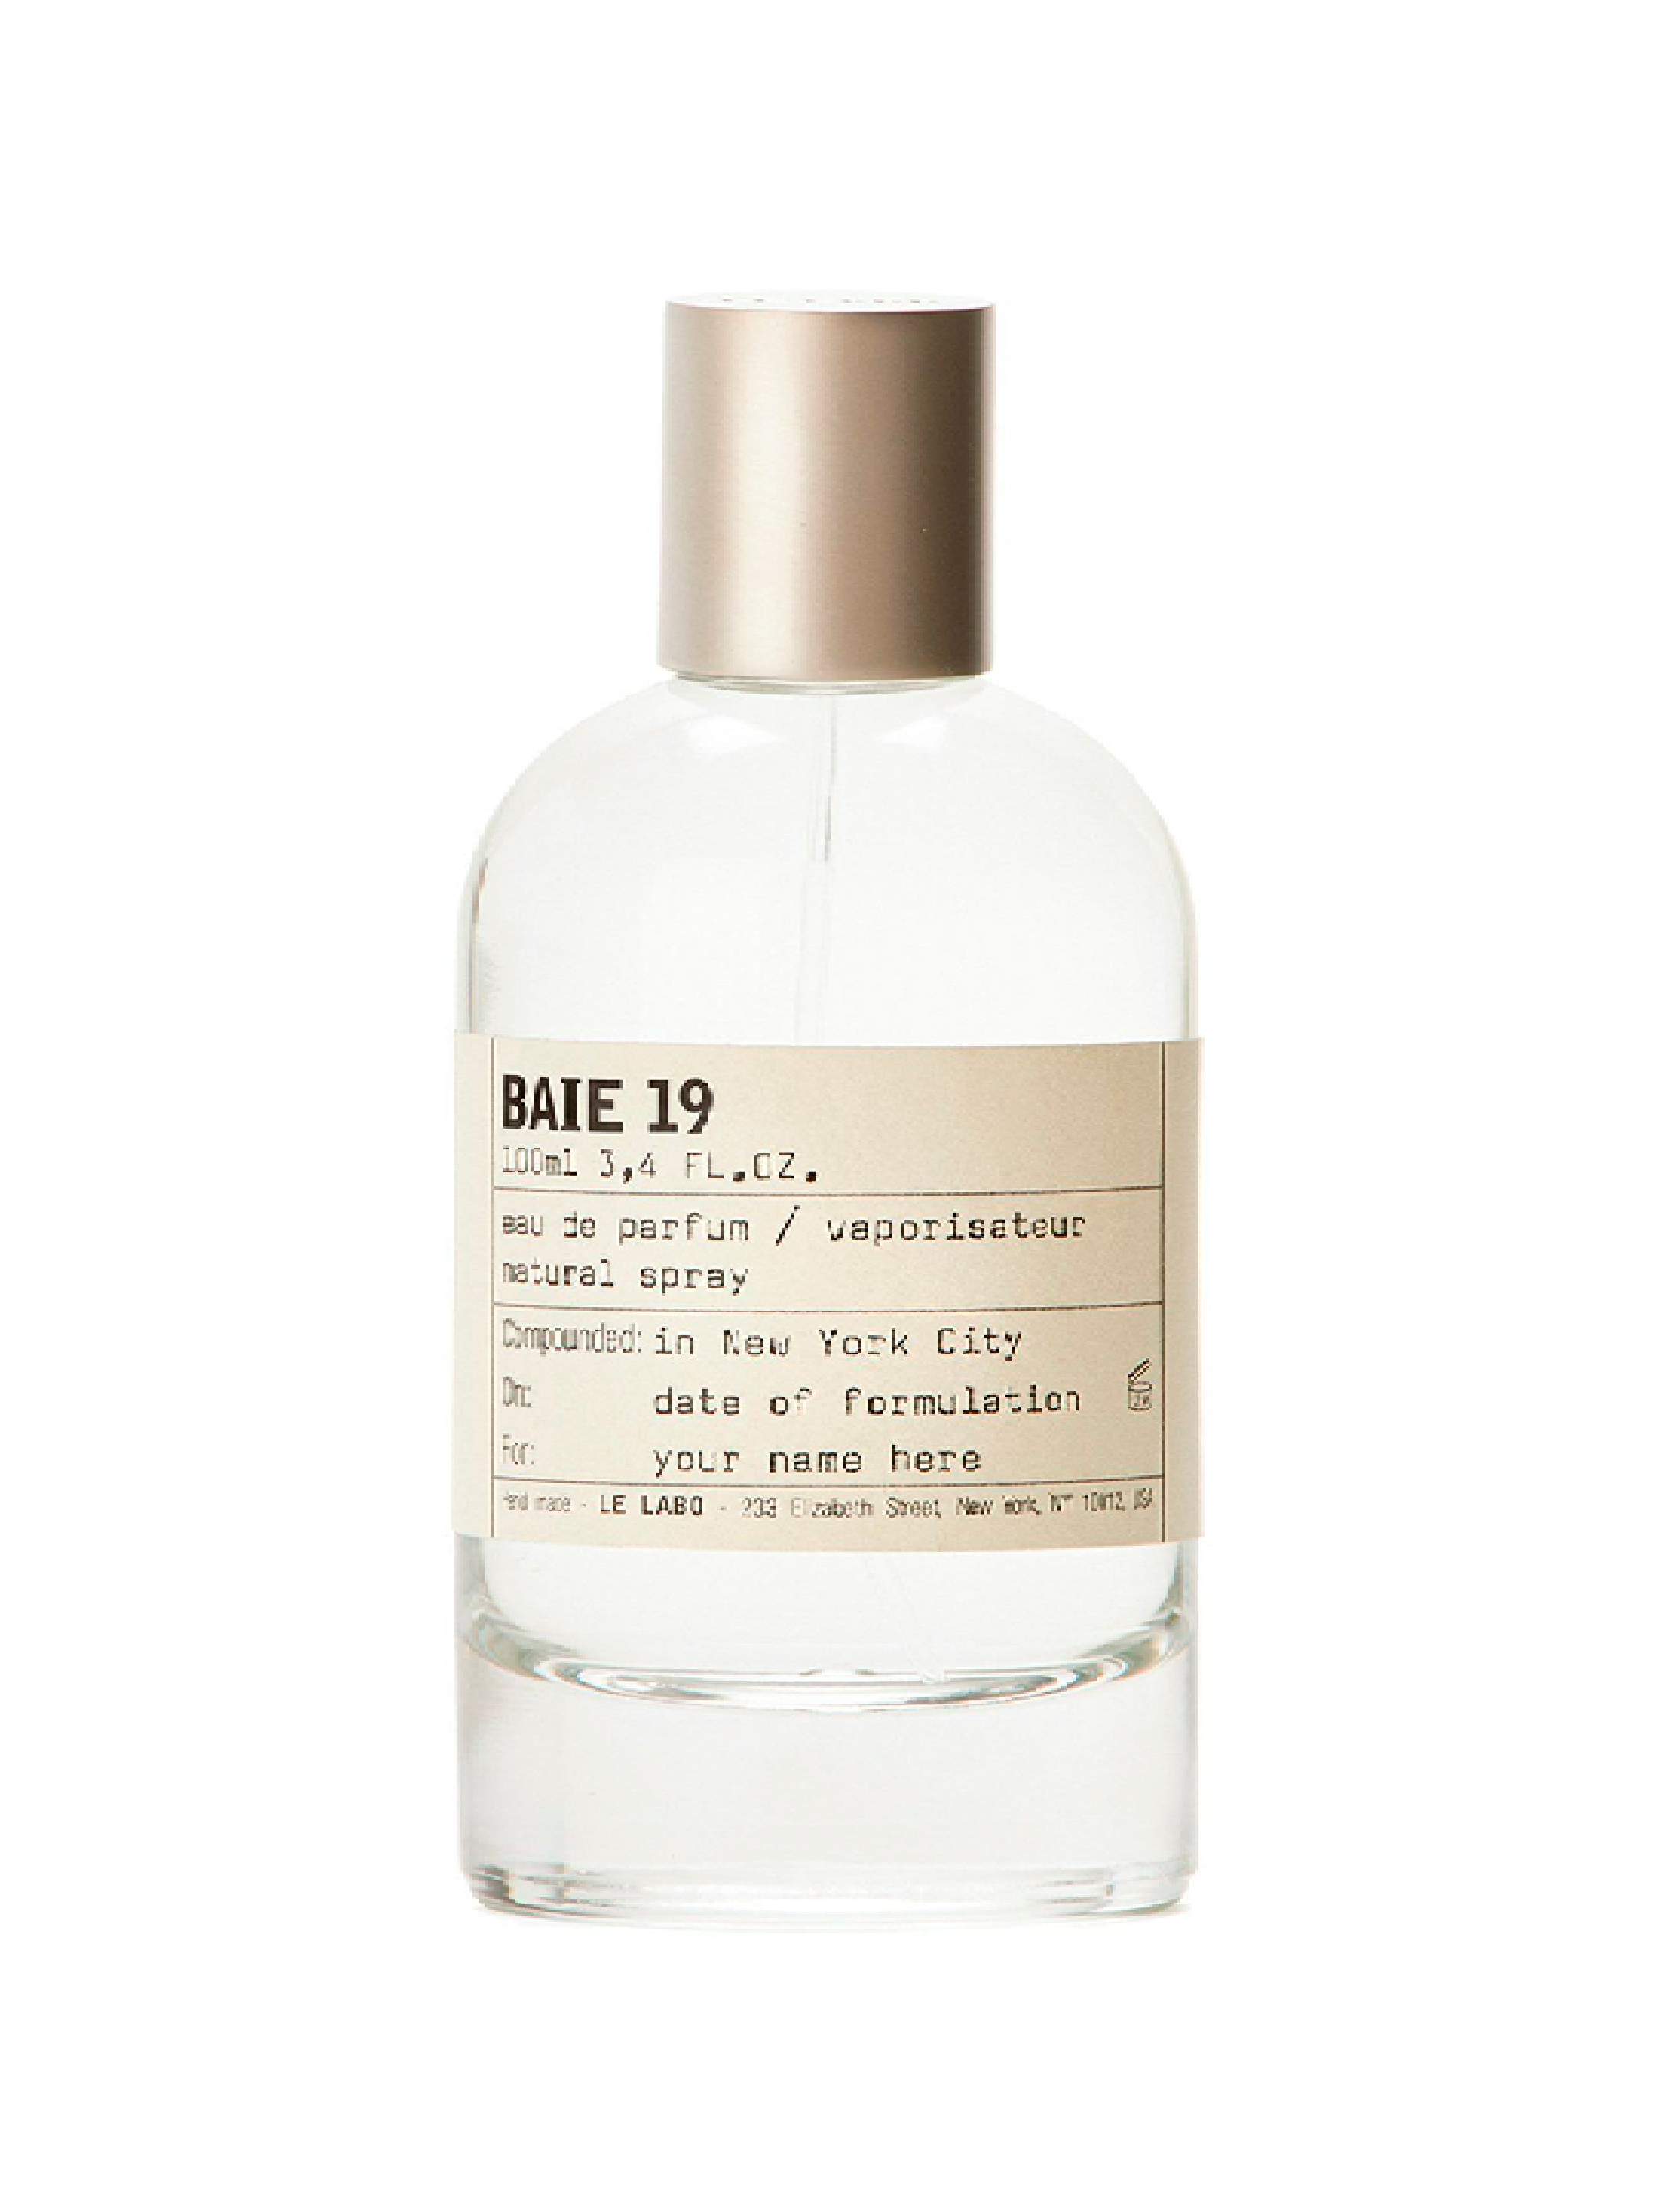 Another 13 отзывы. Le Labo Ambrette 9 парфюмерная вода 100 мл. Парфюм le Labo another 13. Духи le Labo Santal 33. Парфюмерная вода le Labo Rose 31, 100 мл.